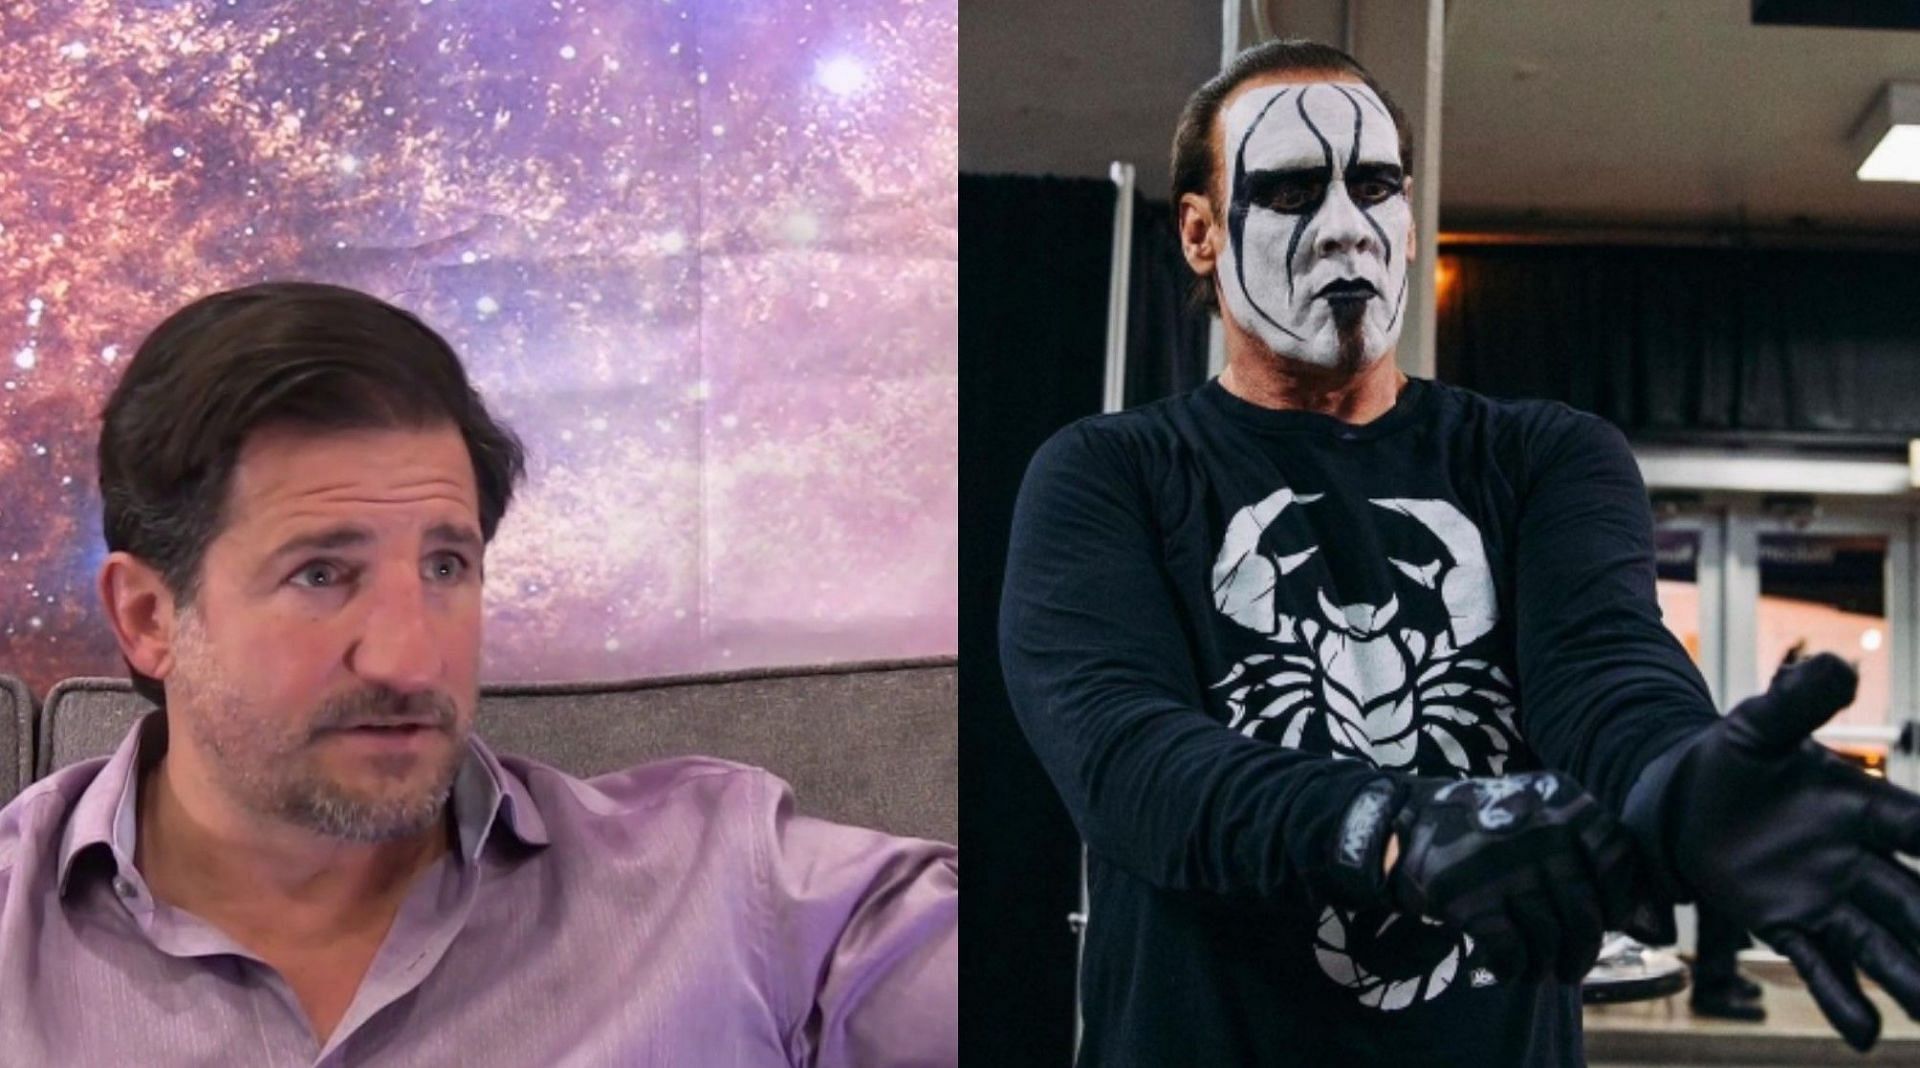 Sting is a 2016 WWE Hall of Famer